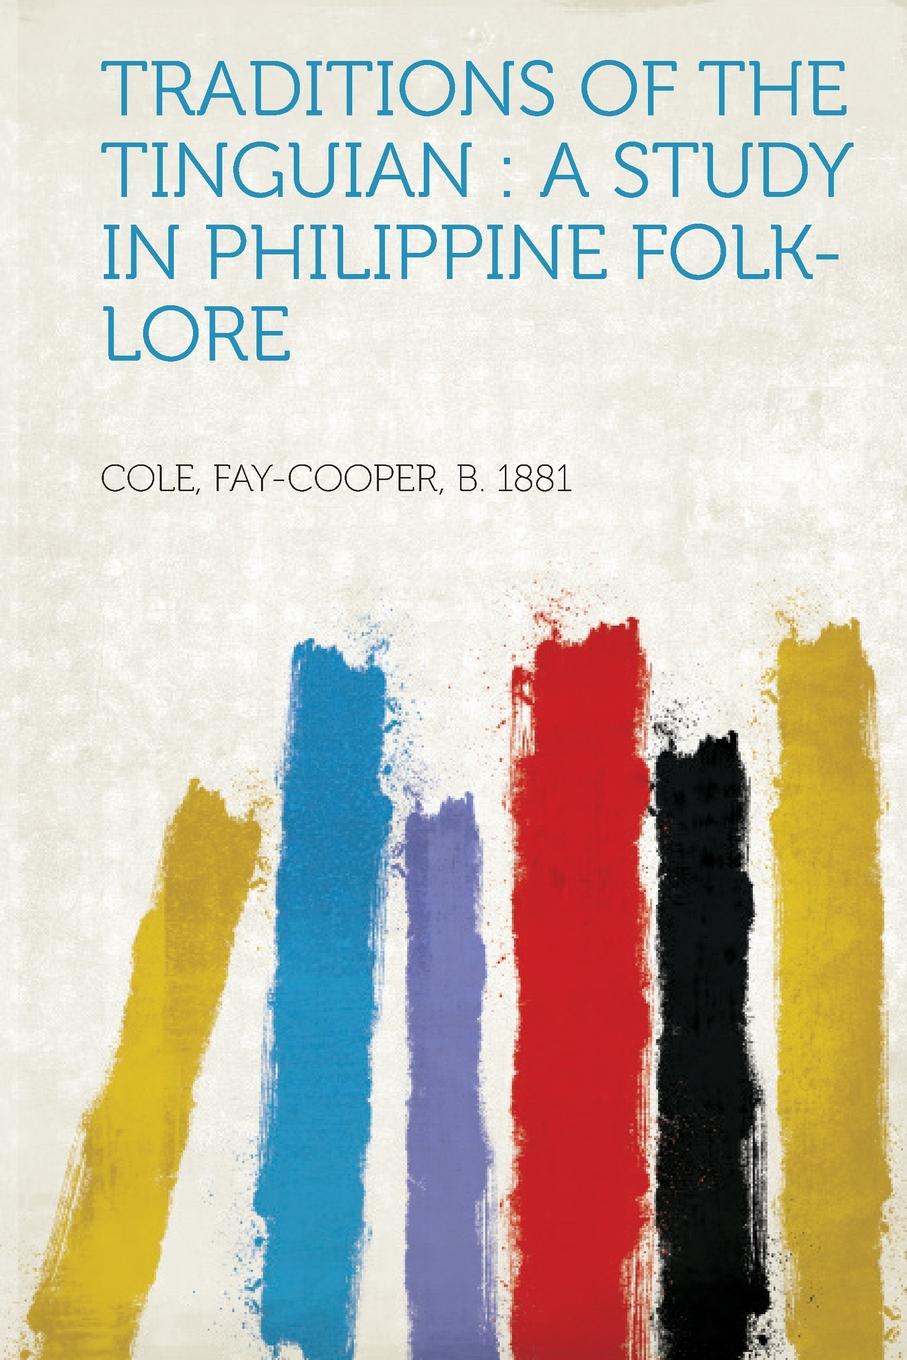 Traditions of the Tinguian. A Study in Philippine Folk-Lore